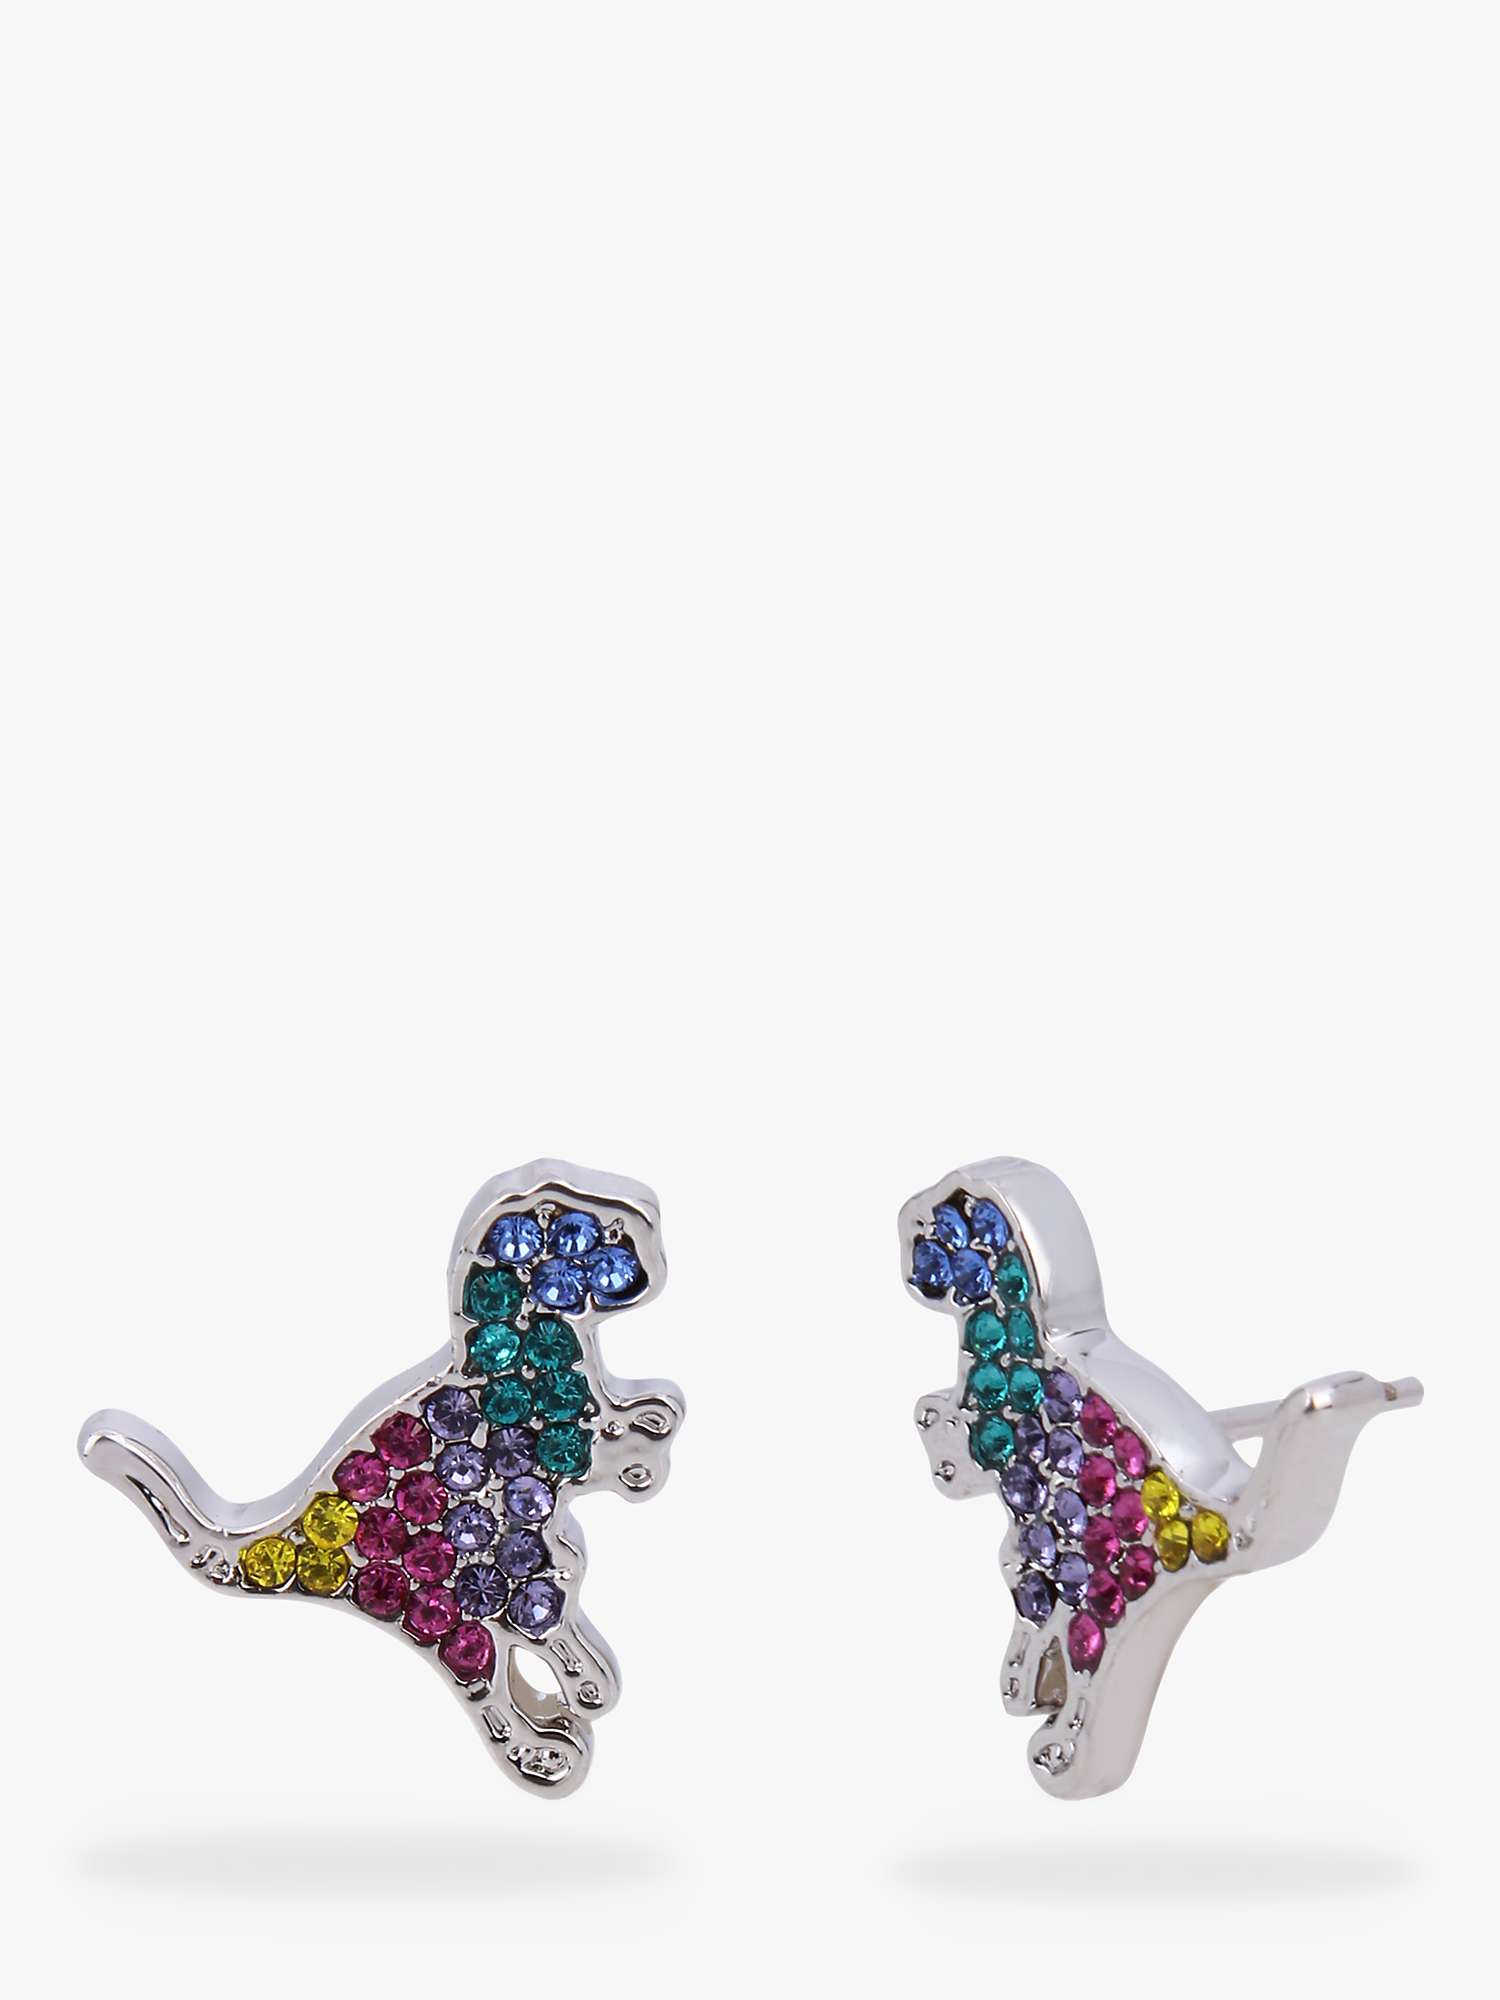 Buy Coach Pave Crystal Rexy Dino Stud Earrings, Silver/Multi Online at johnlewis.com